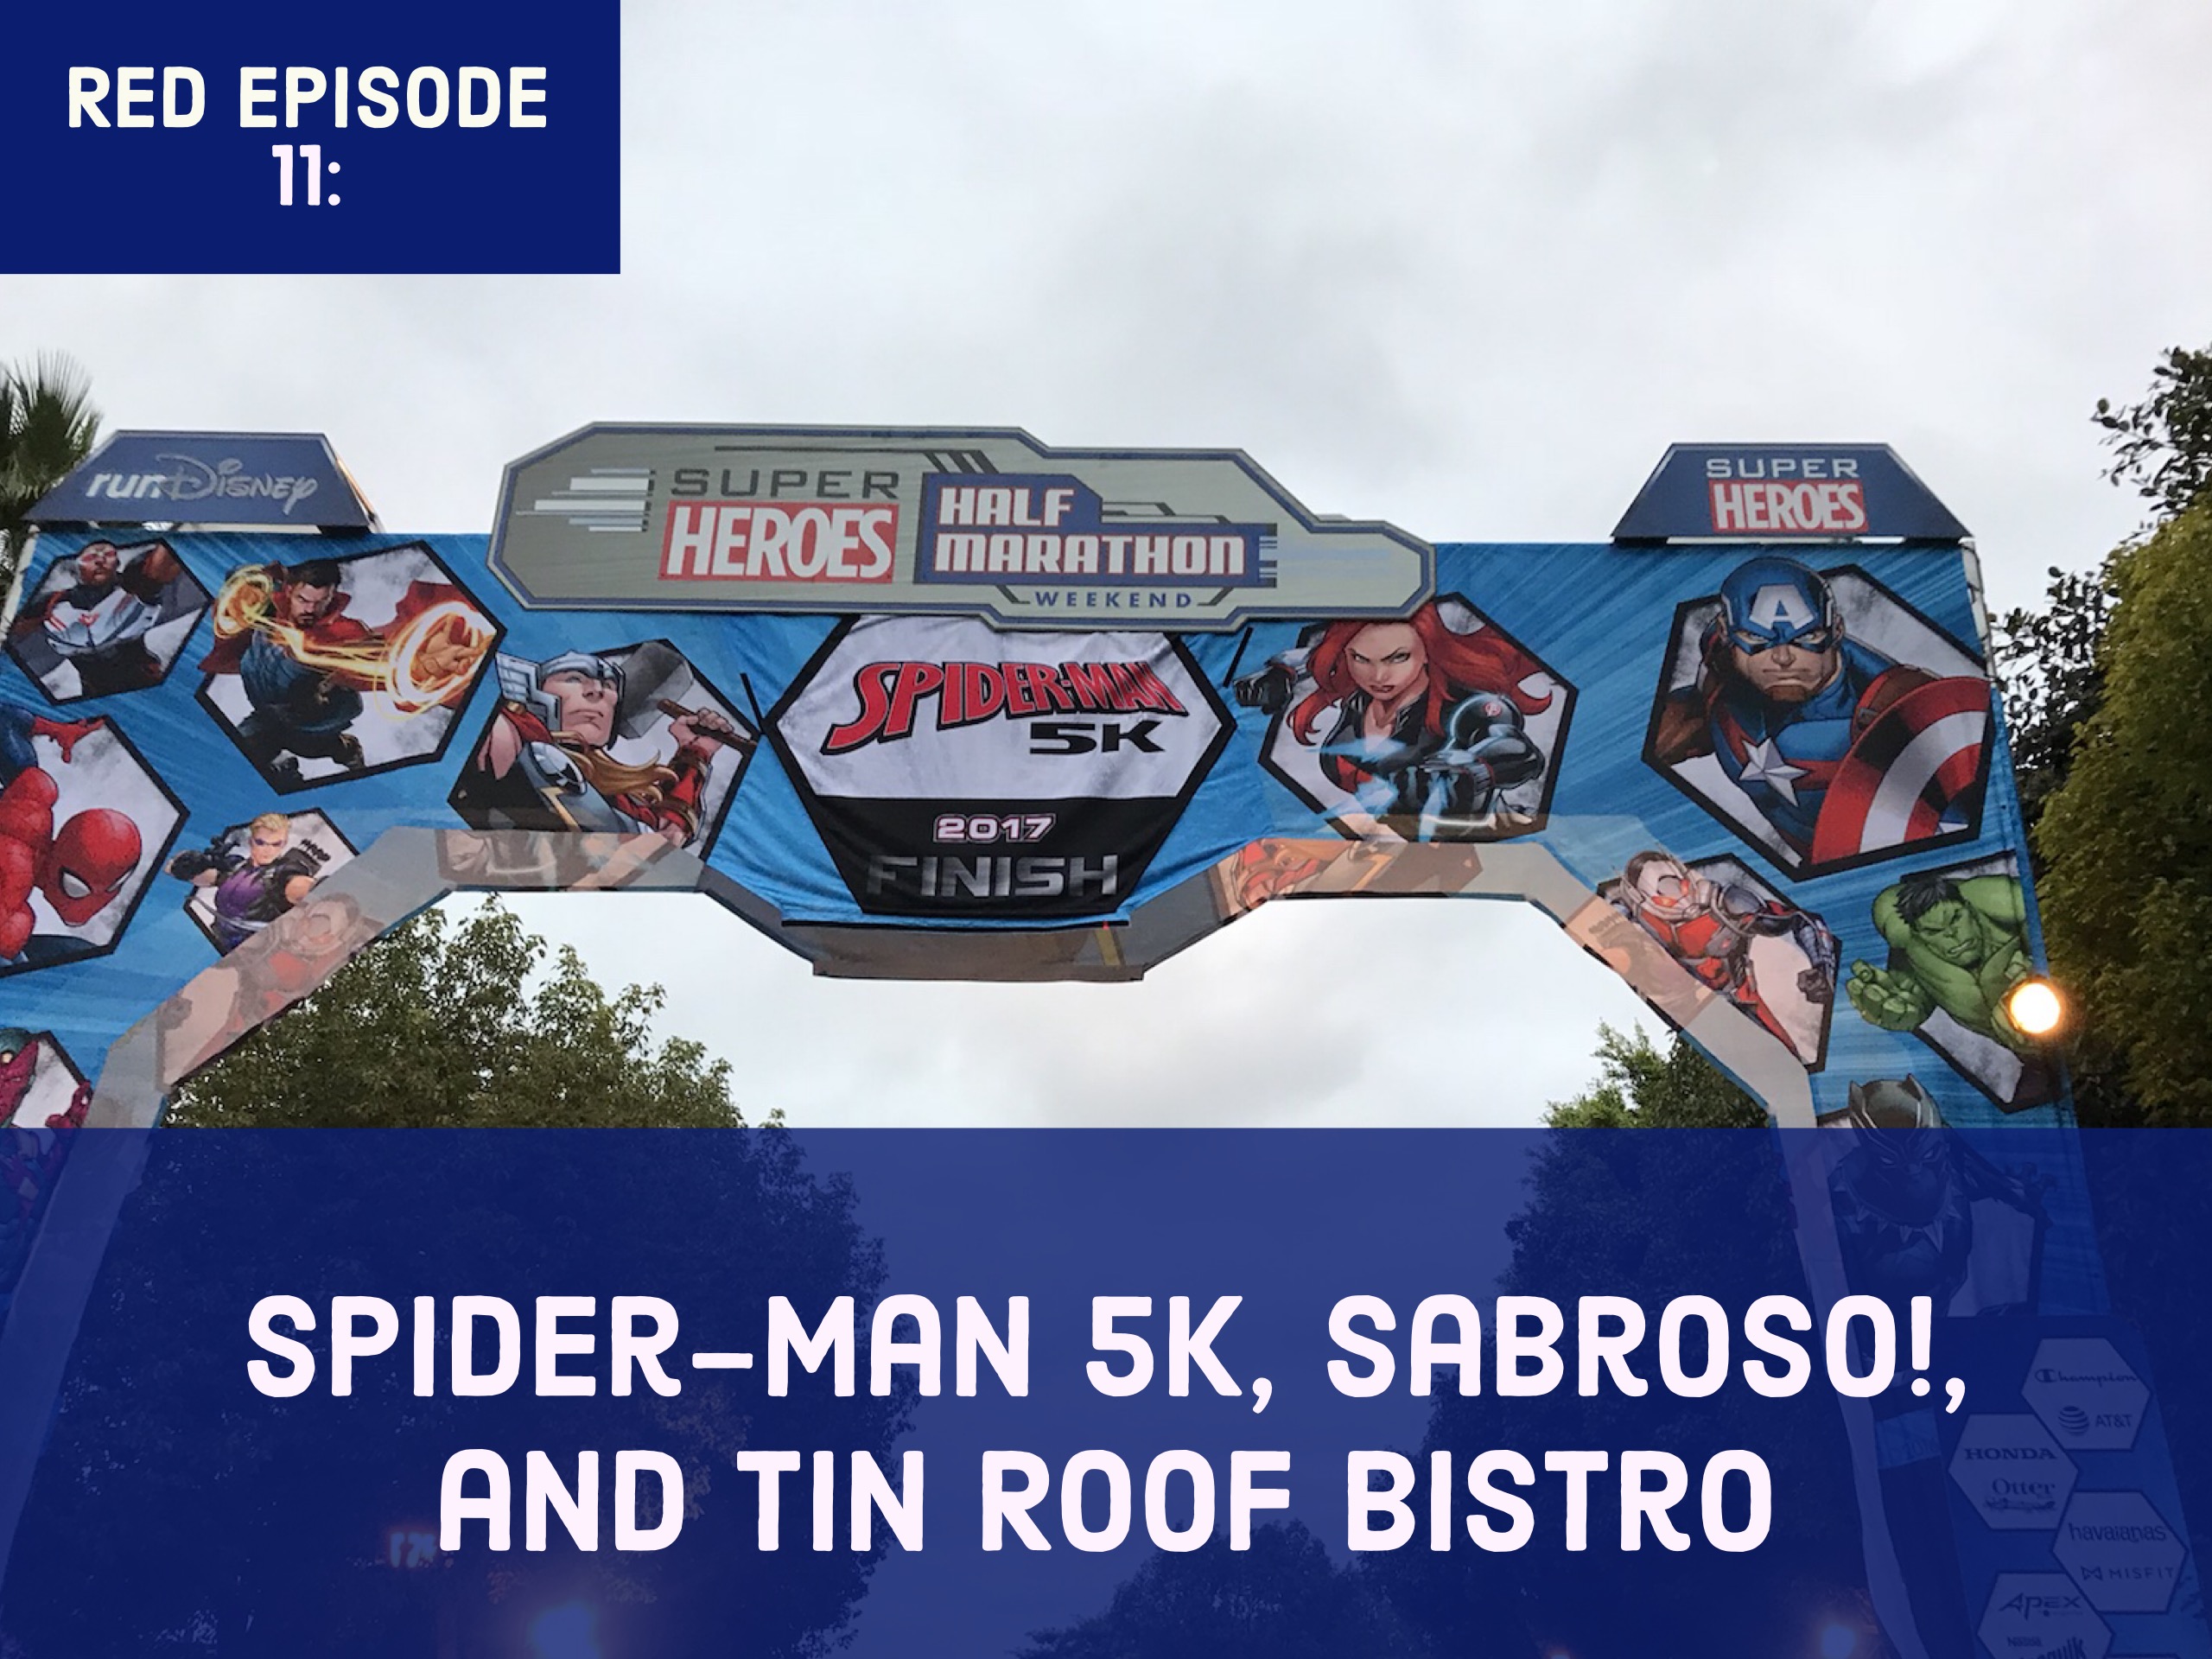 RED Episode #11: Spider-Man 5K, Sabroso!, and Tin Roof Bistro